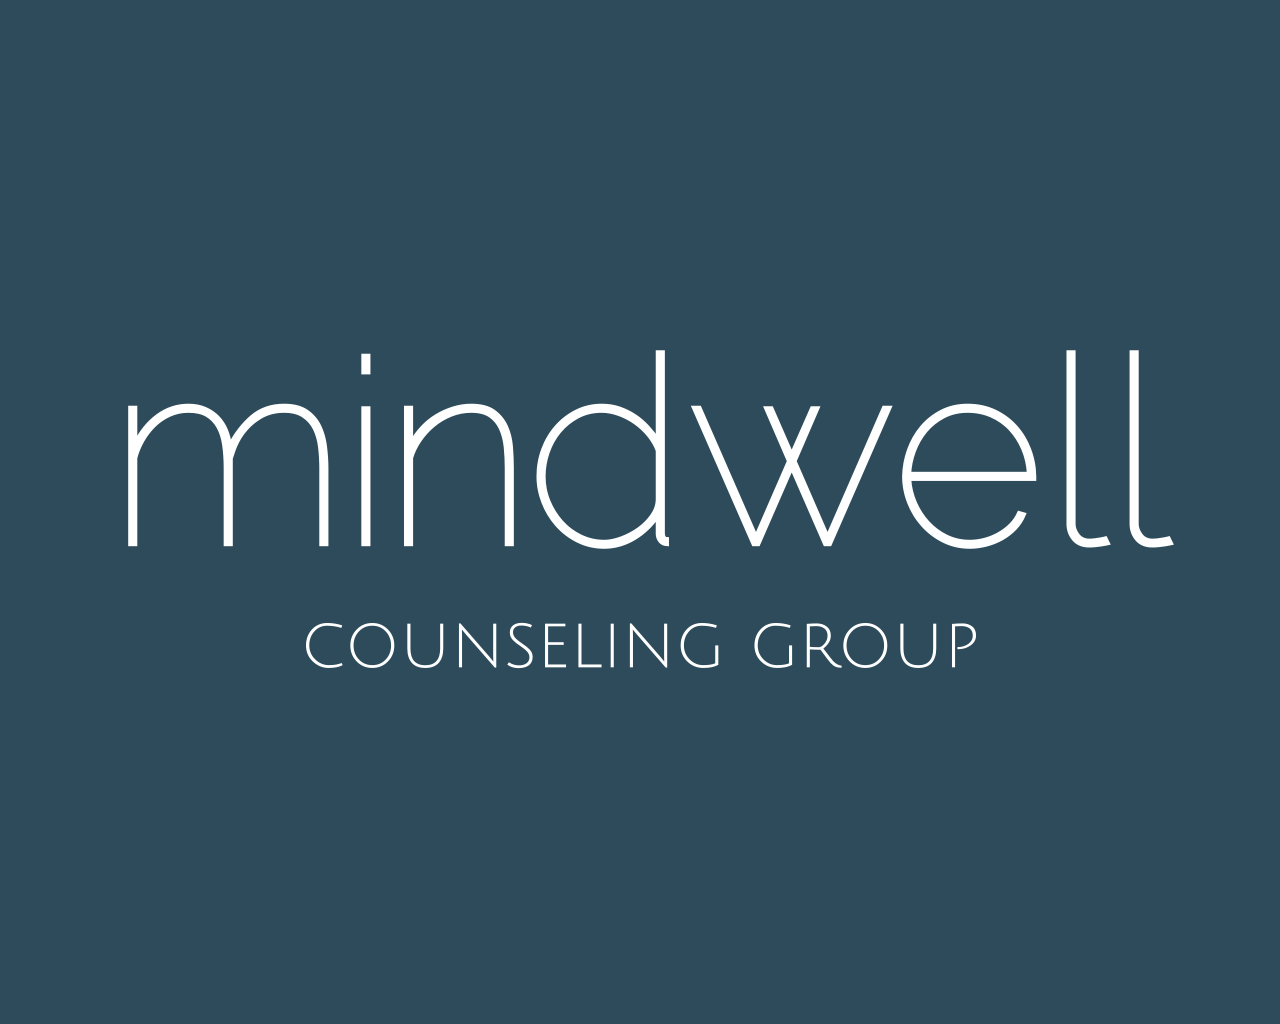 Mindwell Counseling Group